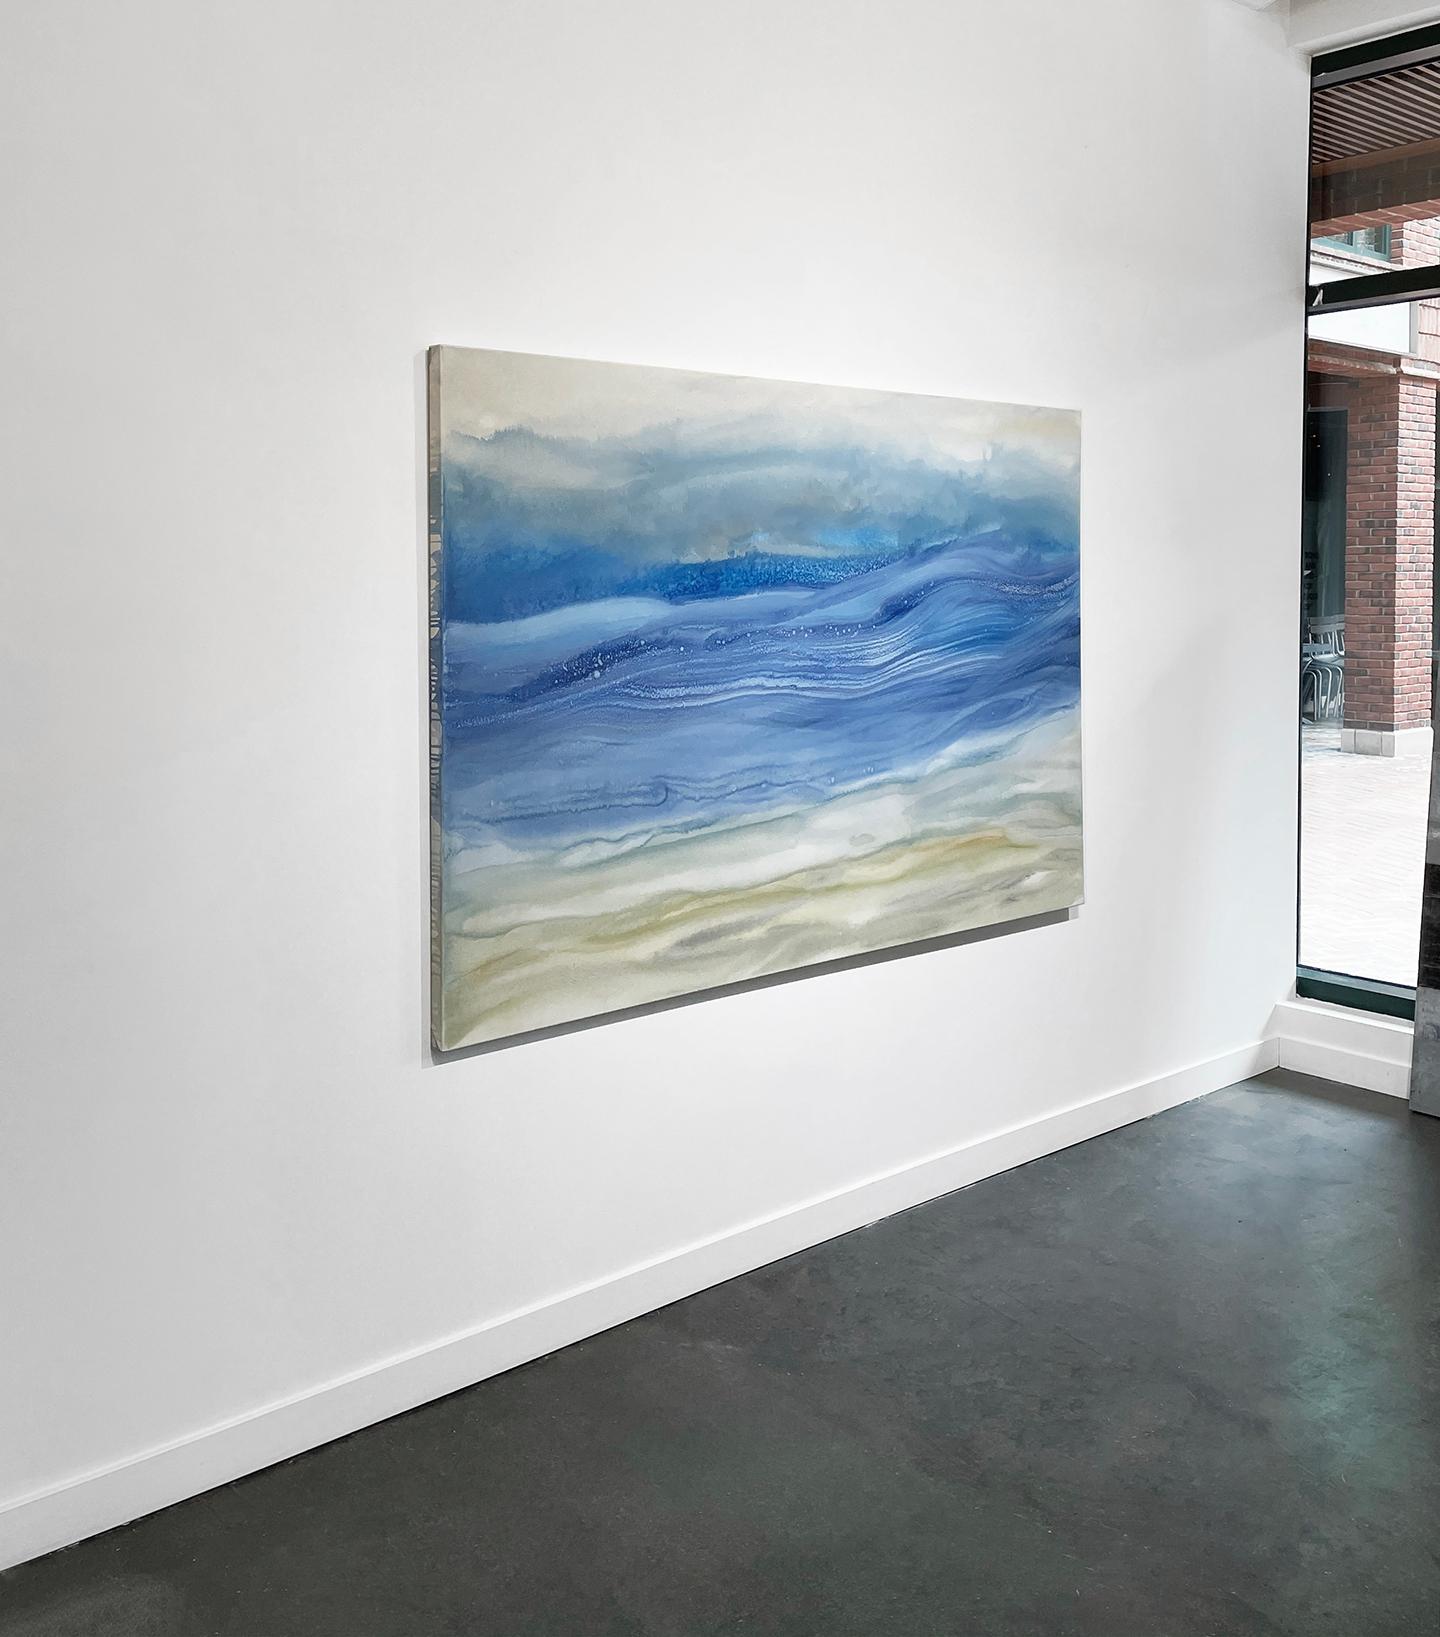 Abstract, coastal, water, waves, blue, green, teal, turquoise, white, soft, Pat Steir

ABOUT TEODORA GUERERRA

BIOGRAPHY
Teodora Guererra received her Bachelor of Arts in Art Education with a minor in Studio Art from Southern Connecticut University